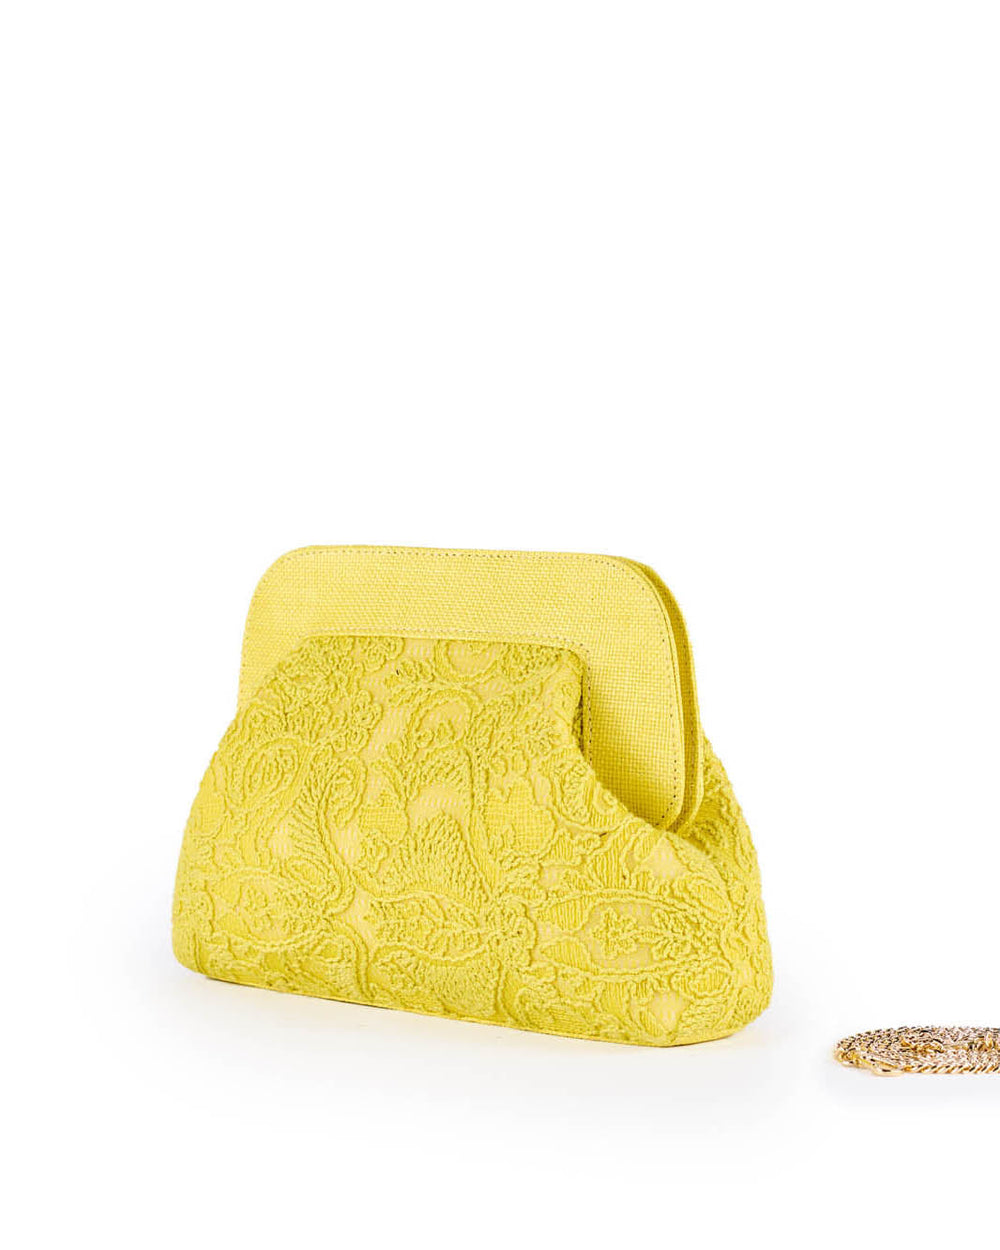 Yellow textured clutch bag with a gold chain against a white background